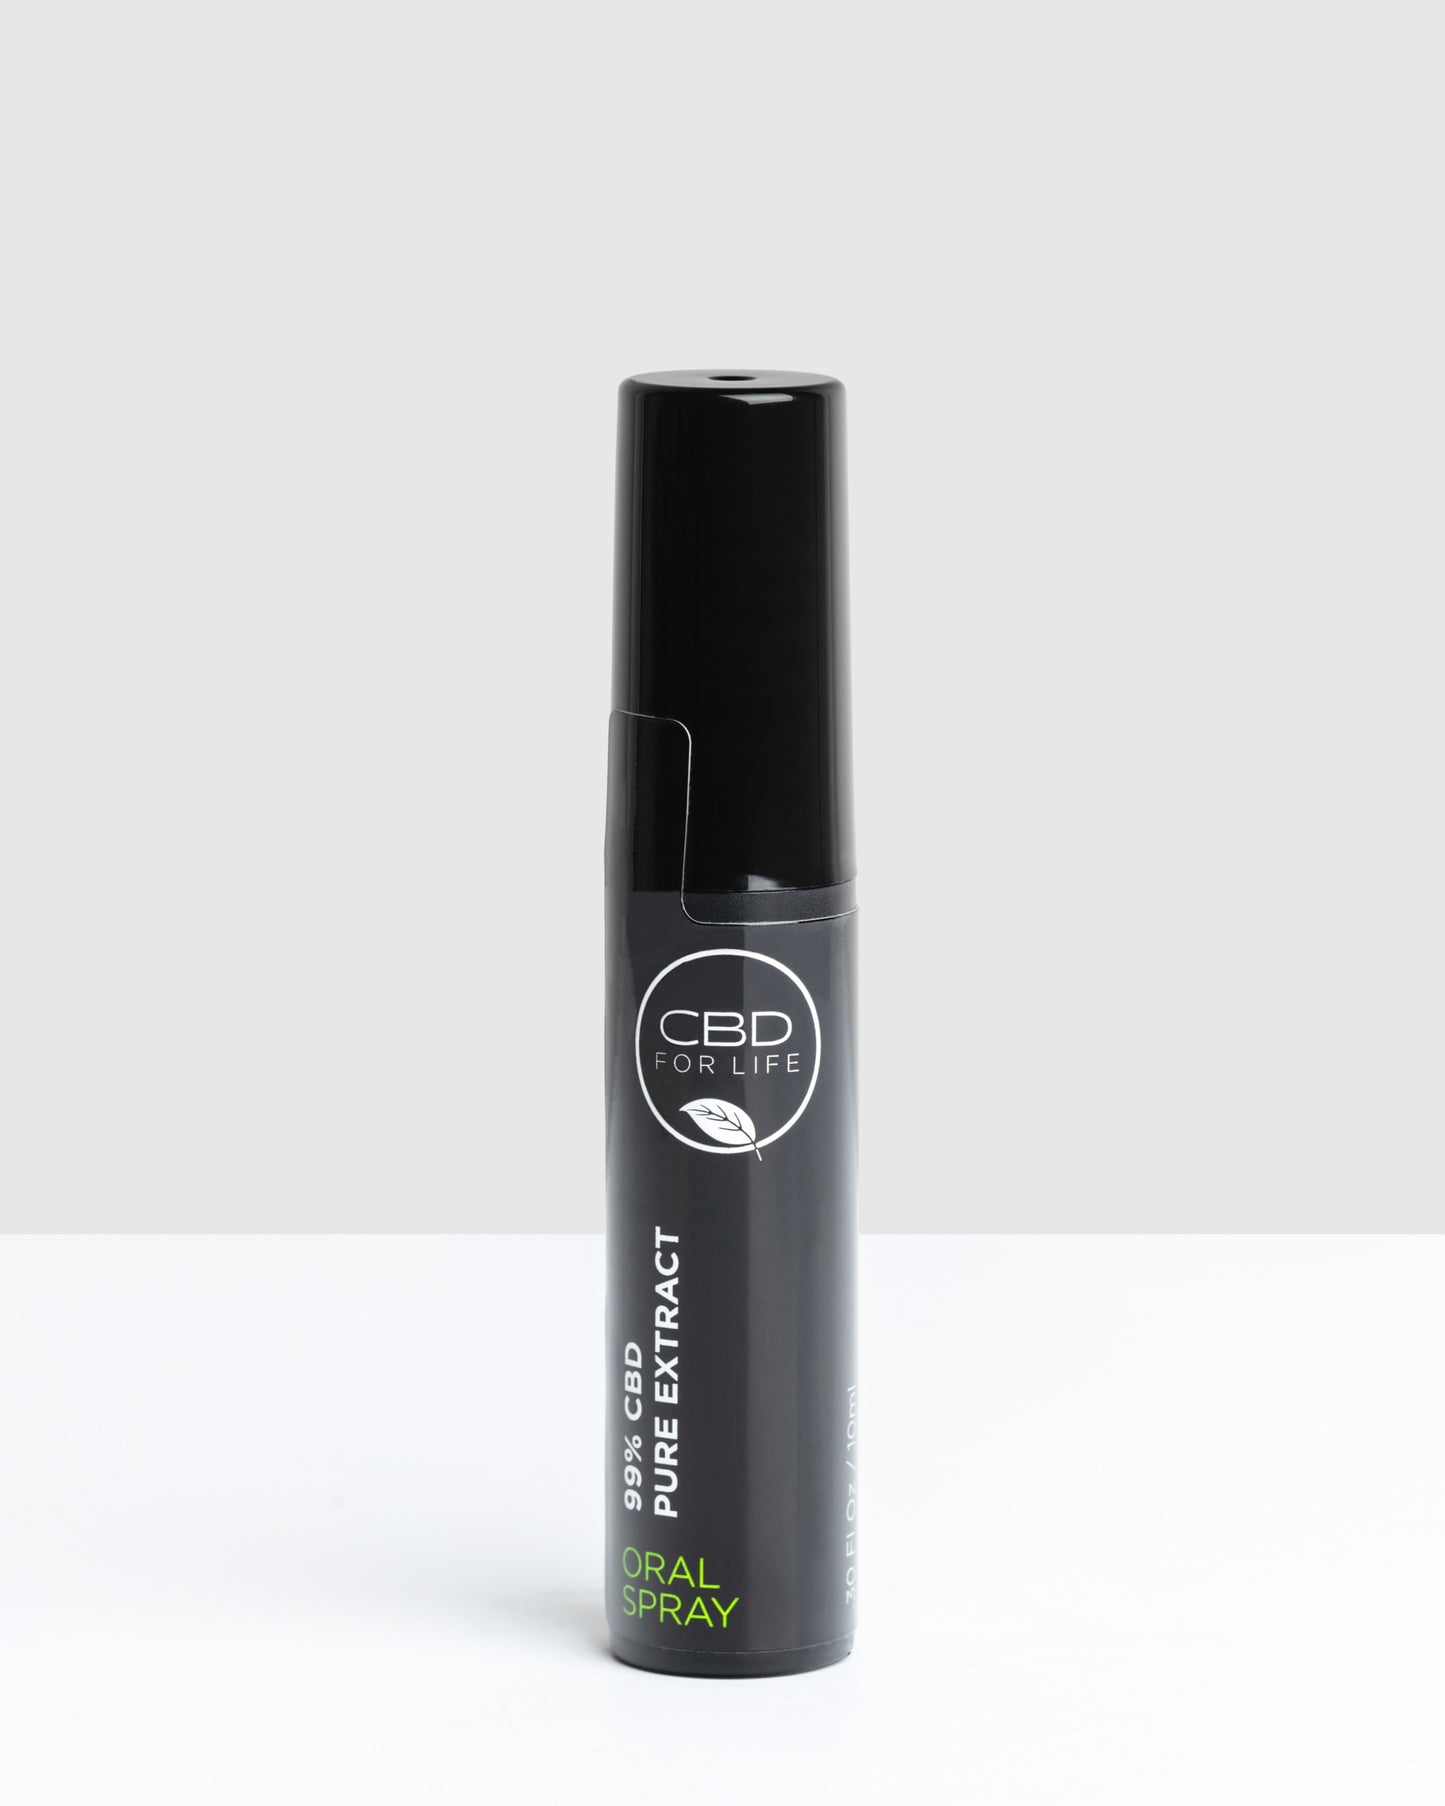 CBD Spray is our easiest and most convenient intake, the formula is water soluble, which makes it more readily absorbed by the body for noticeably faster results. A few sprays under your tongue delivers the anti-everything support you need